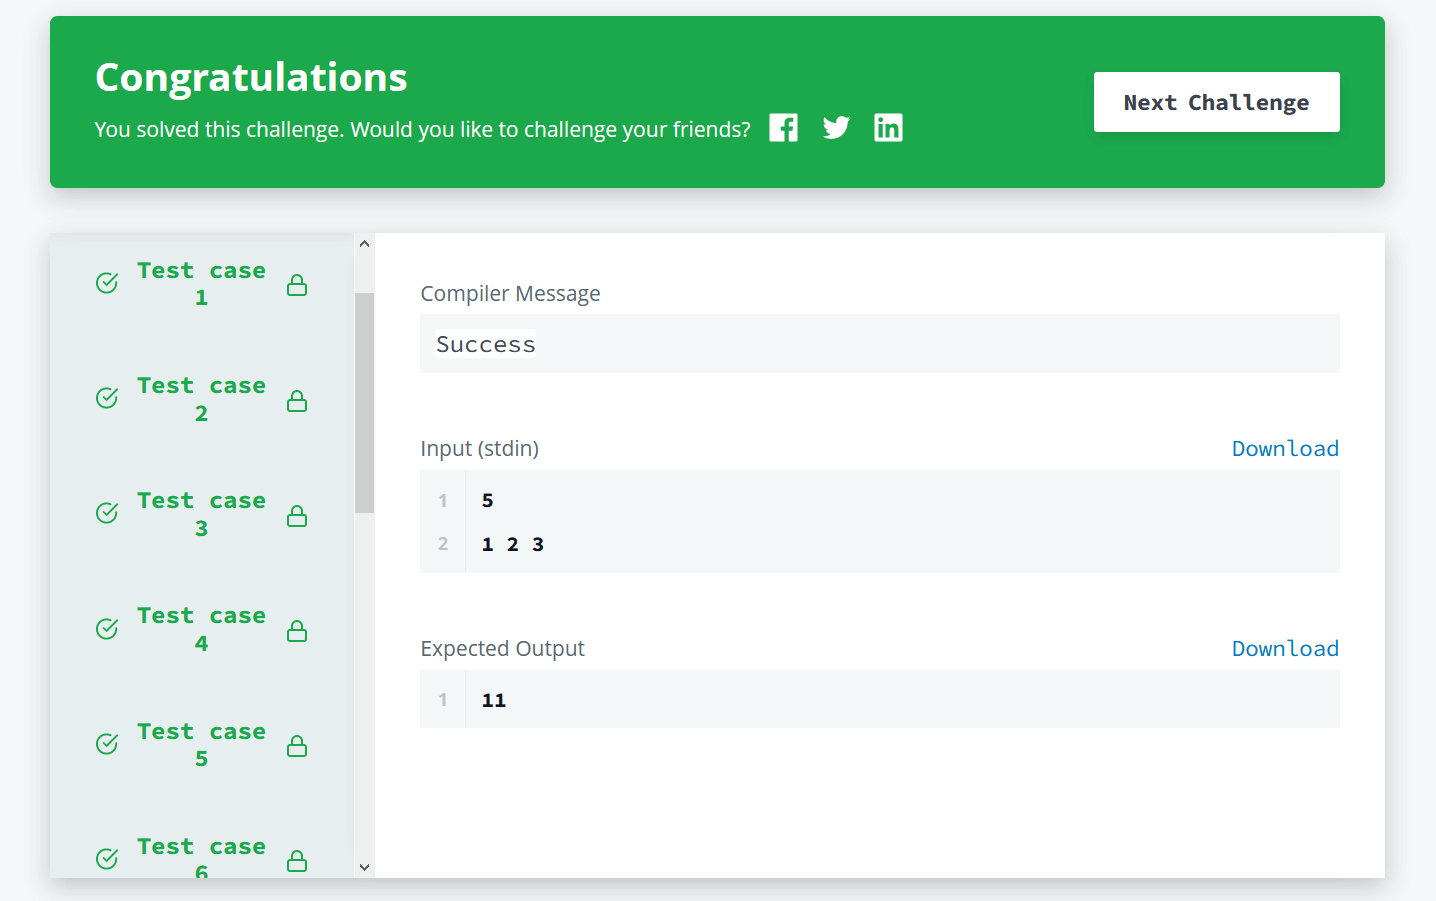 Calculate the Nth Term HackerRank Solution in C